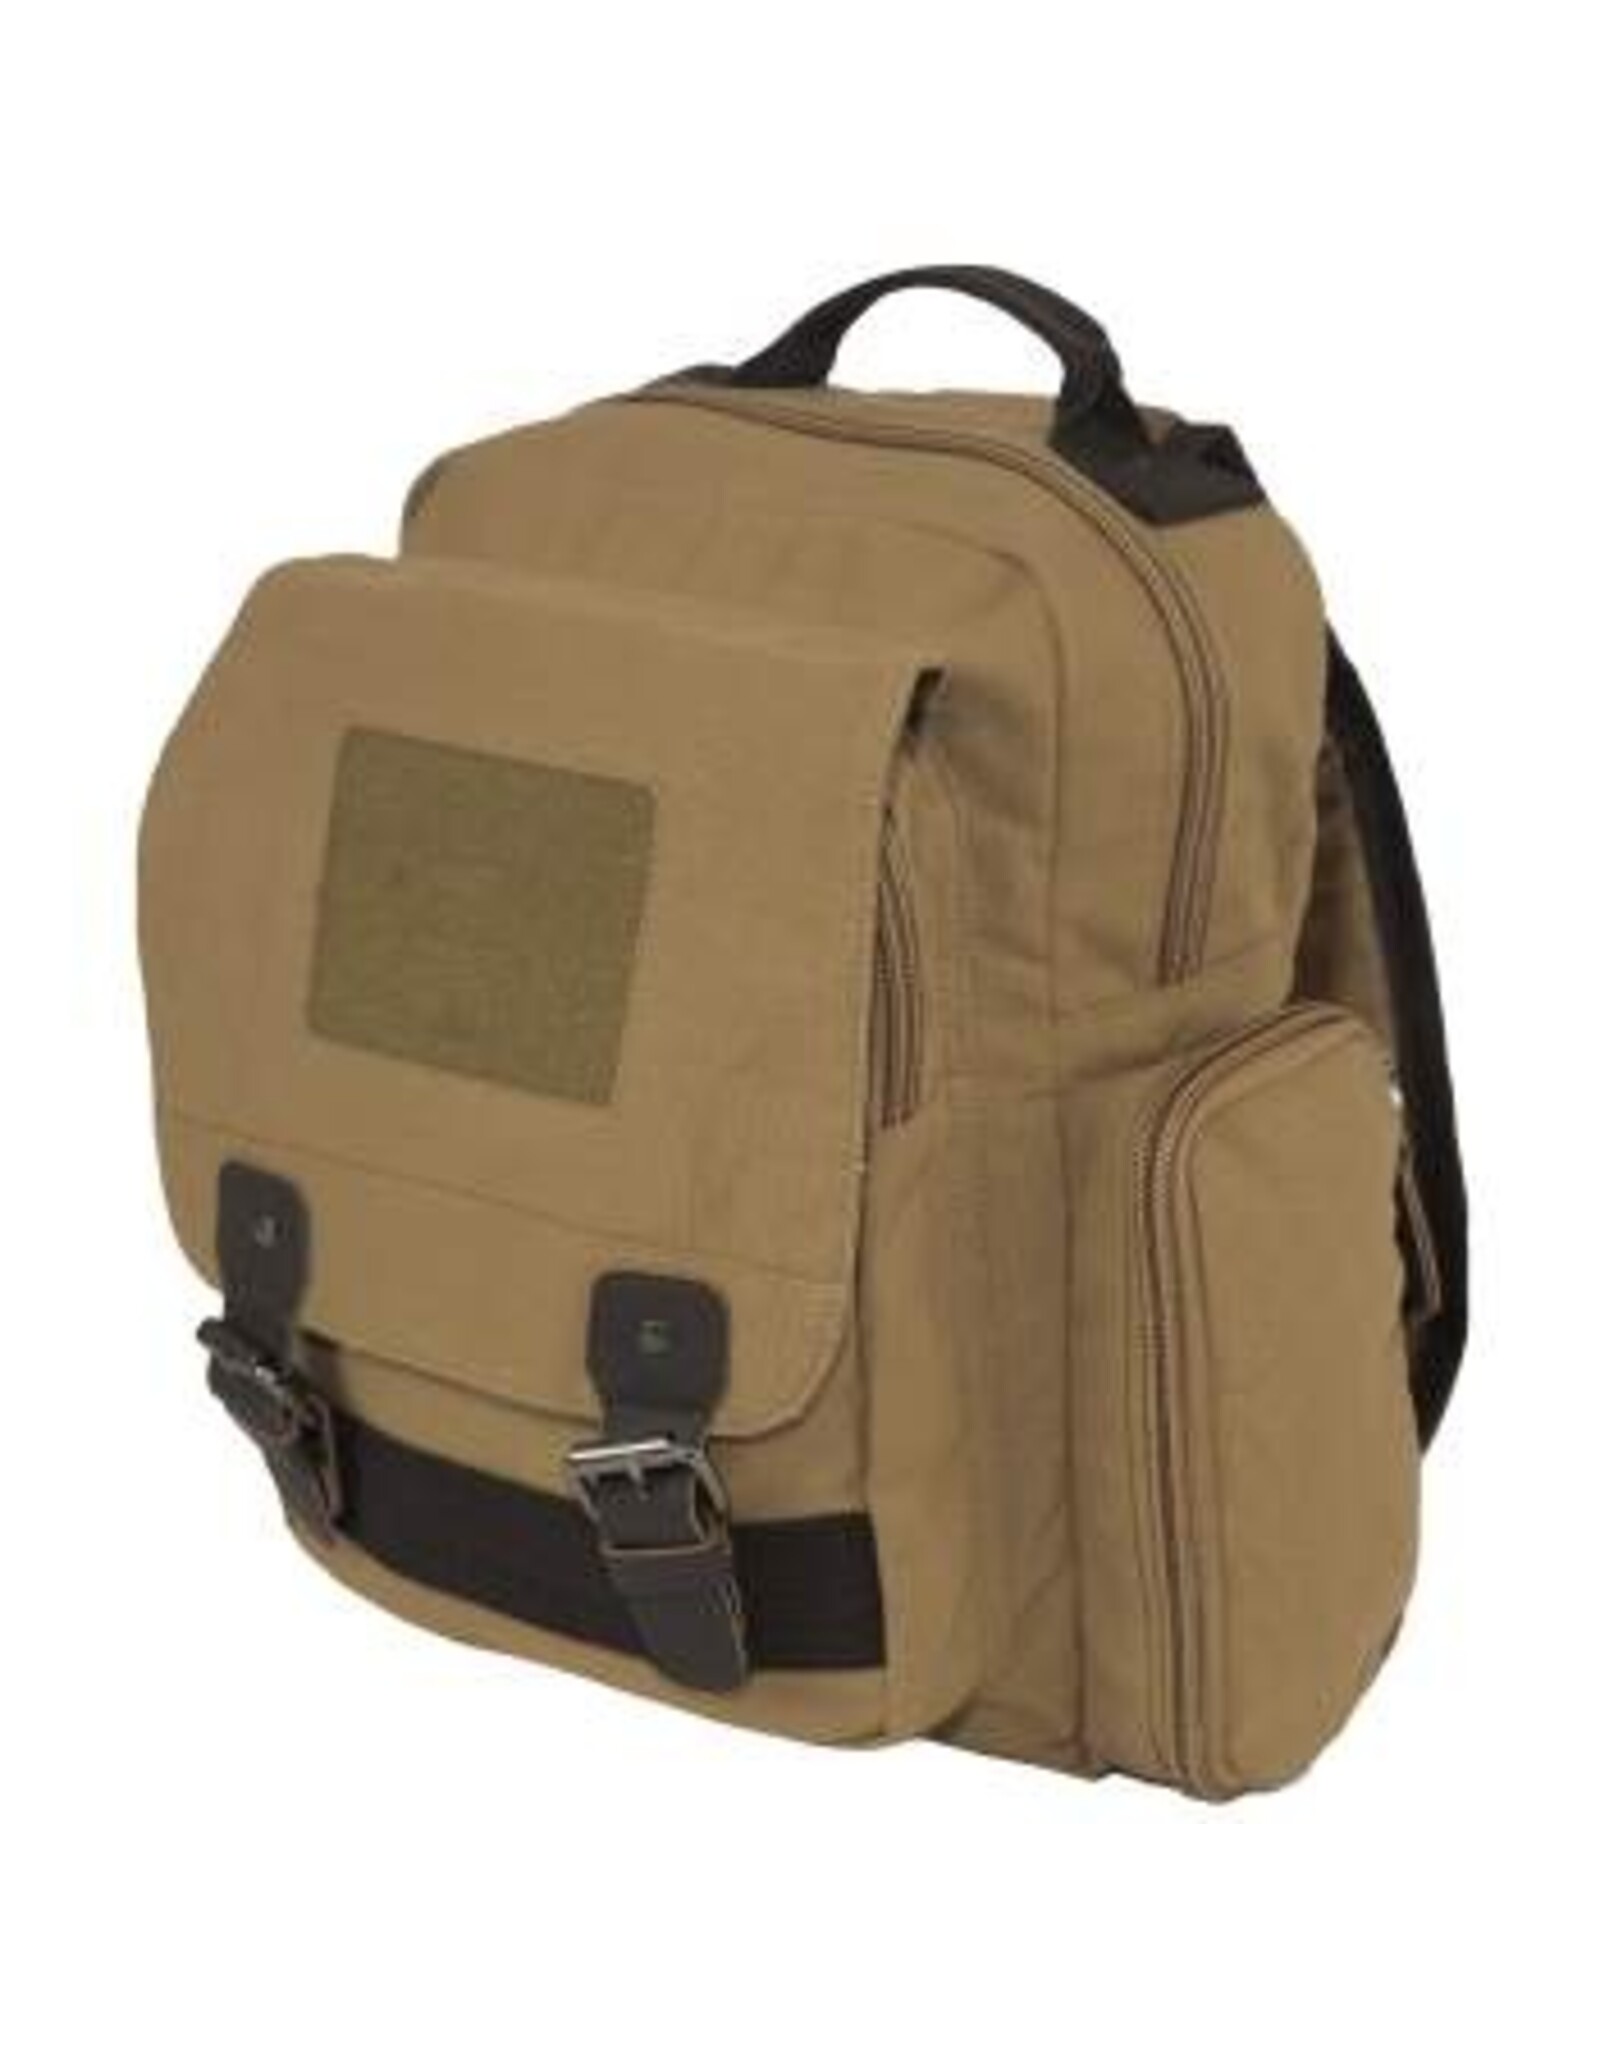 ROTHCO VINTAGE CANVAS SLING BACKPACK  COYOTE